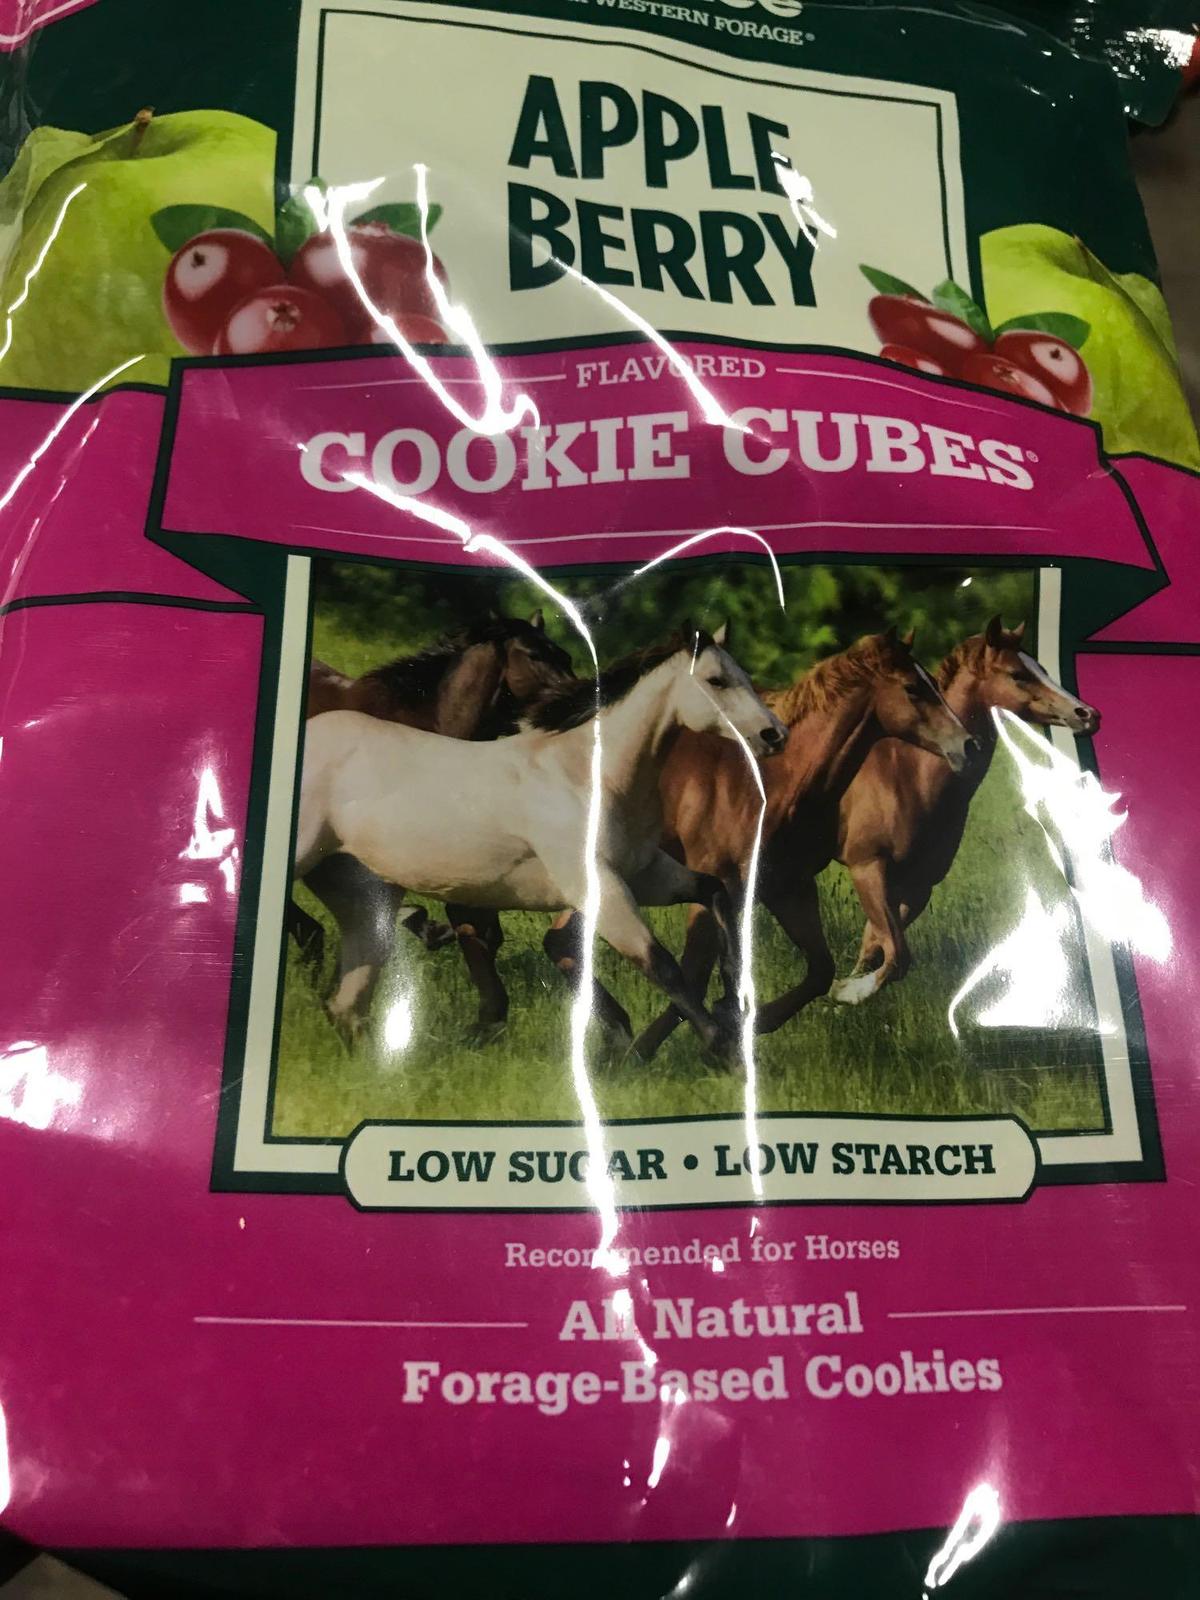 Standee cookie cubes apple berry, recommended for horses 2 lbs